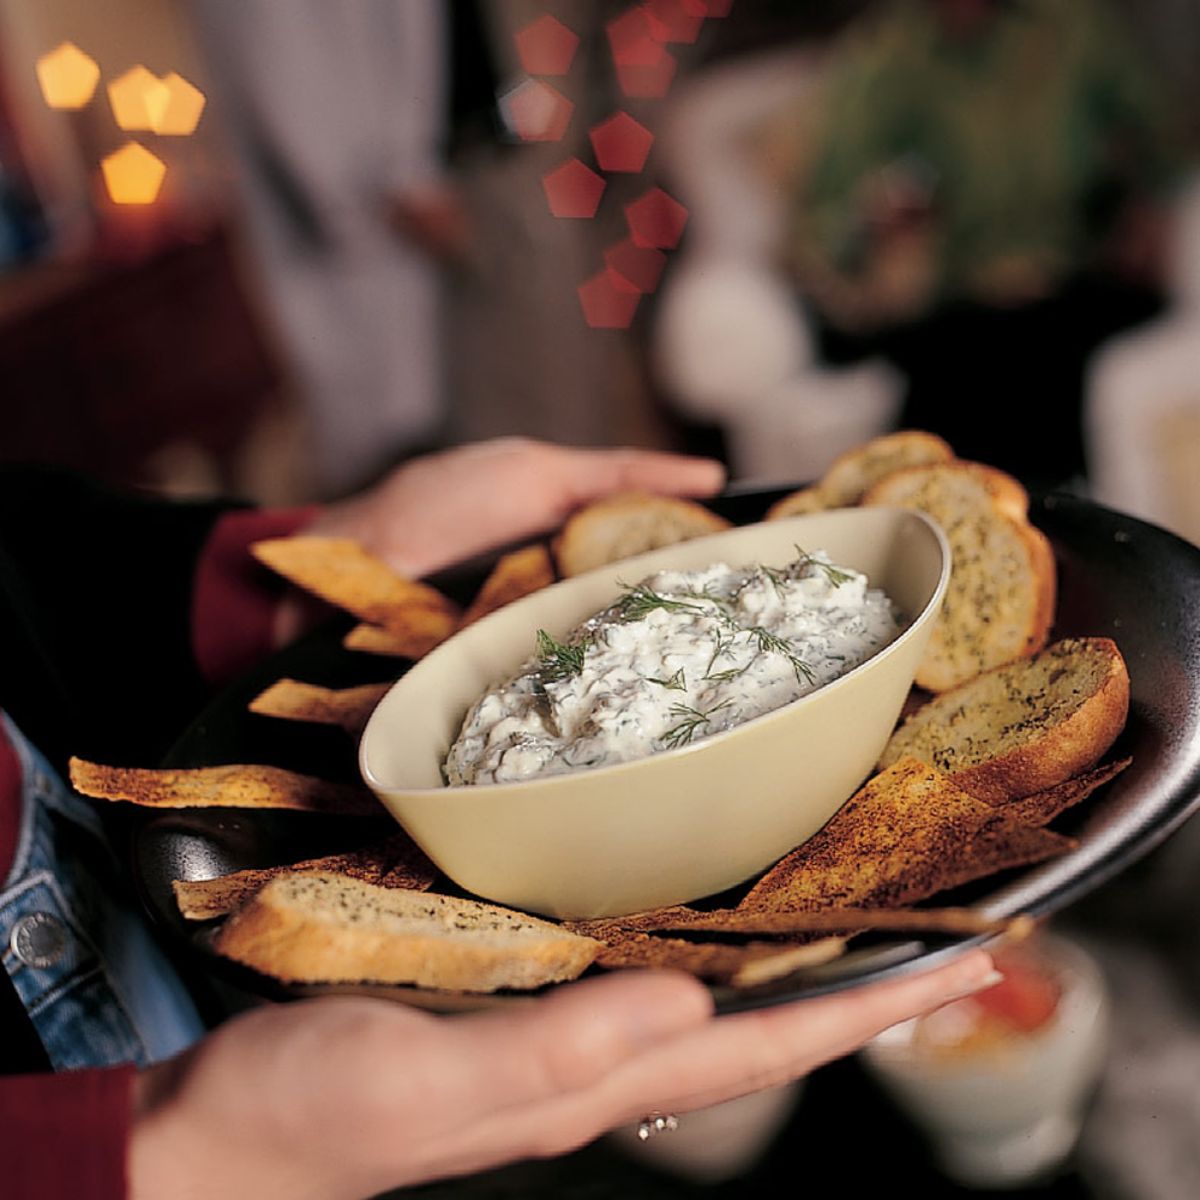 Feta Spinach Dip in a cream bowl on a tray with sliced bread and chips.